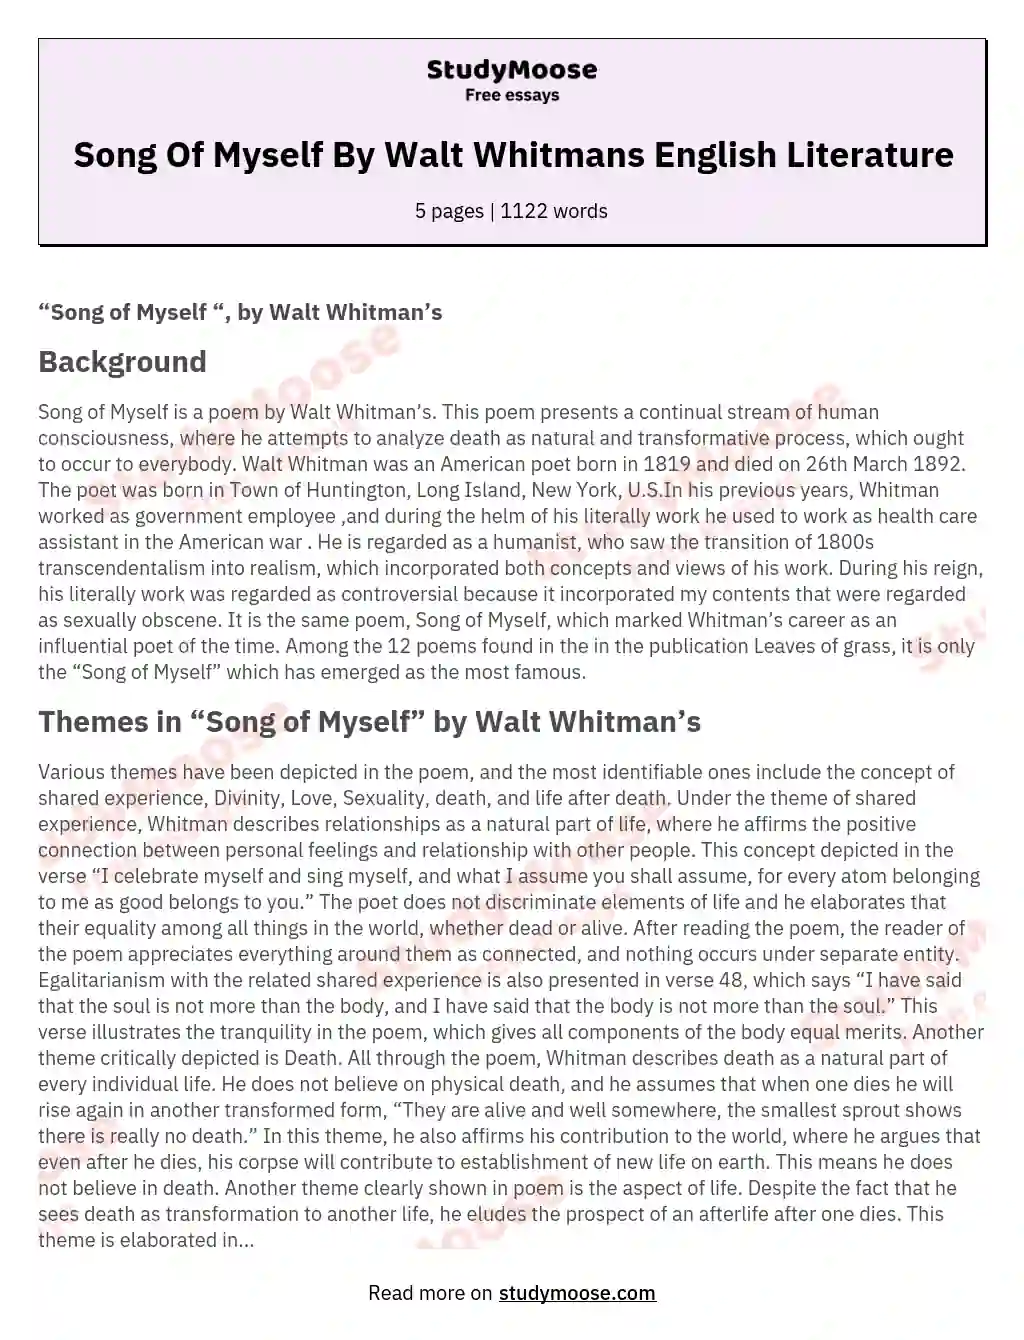 Song Of Myself By Walt Whitmans English Literature